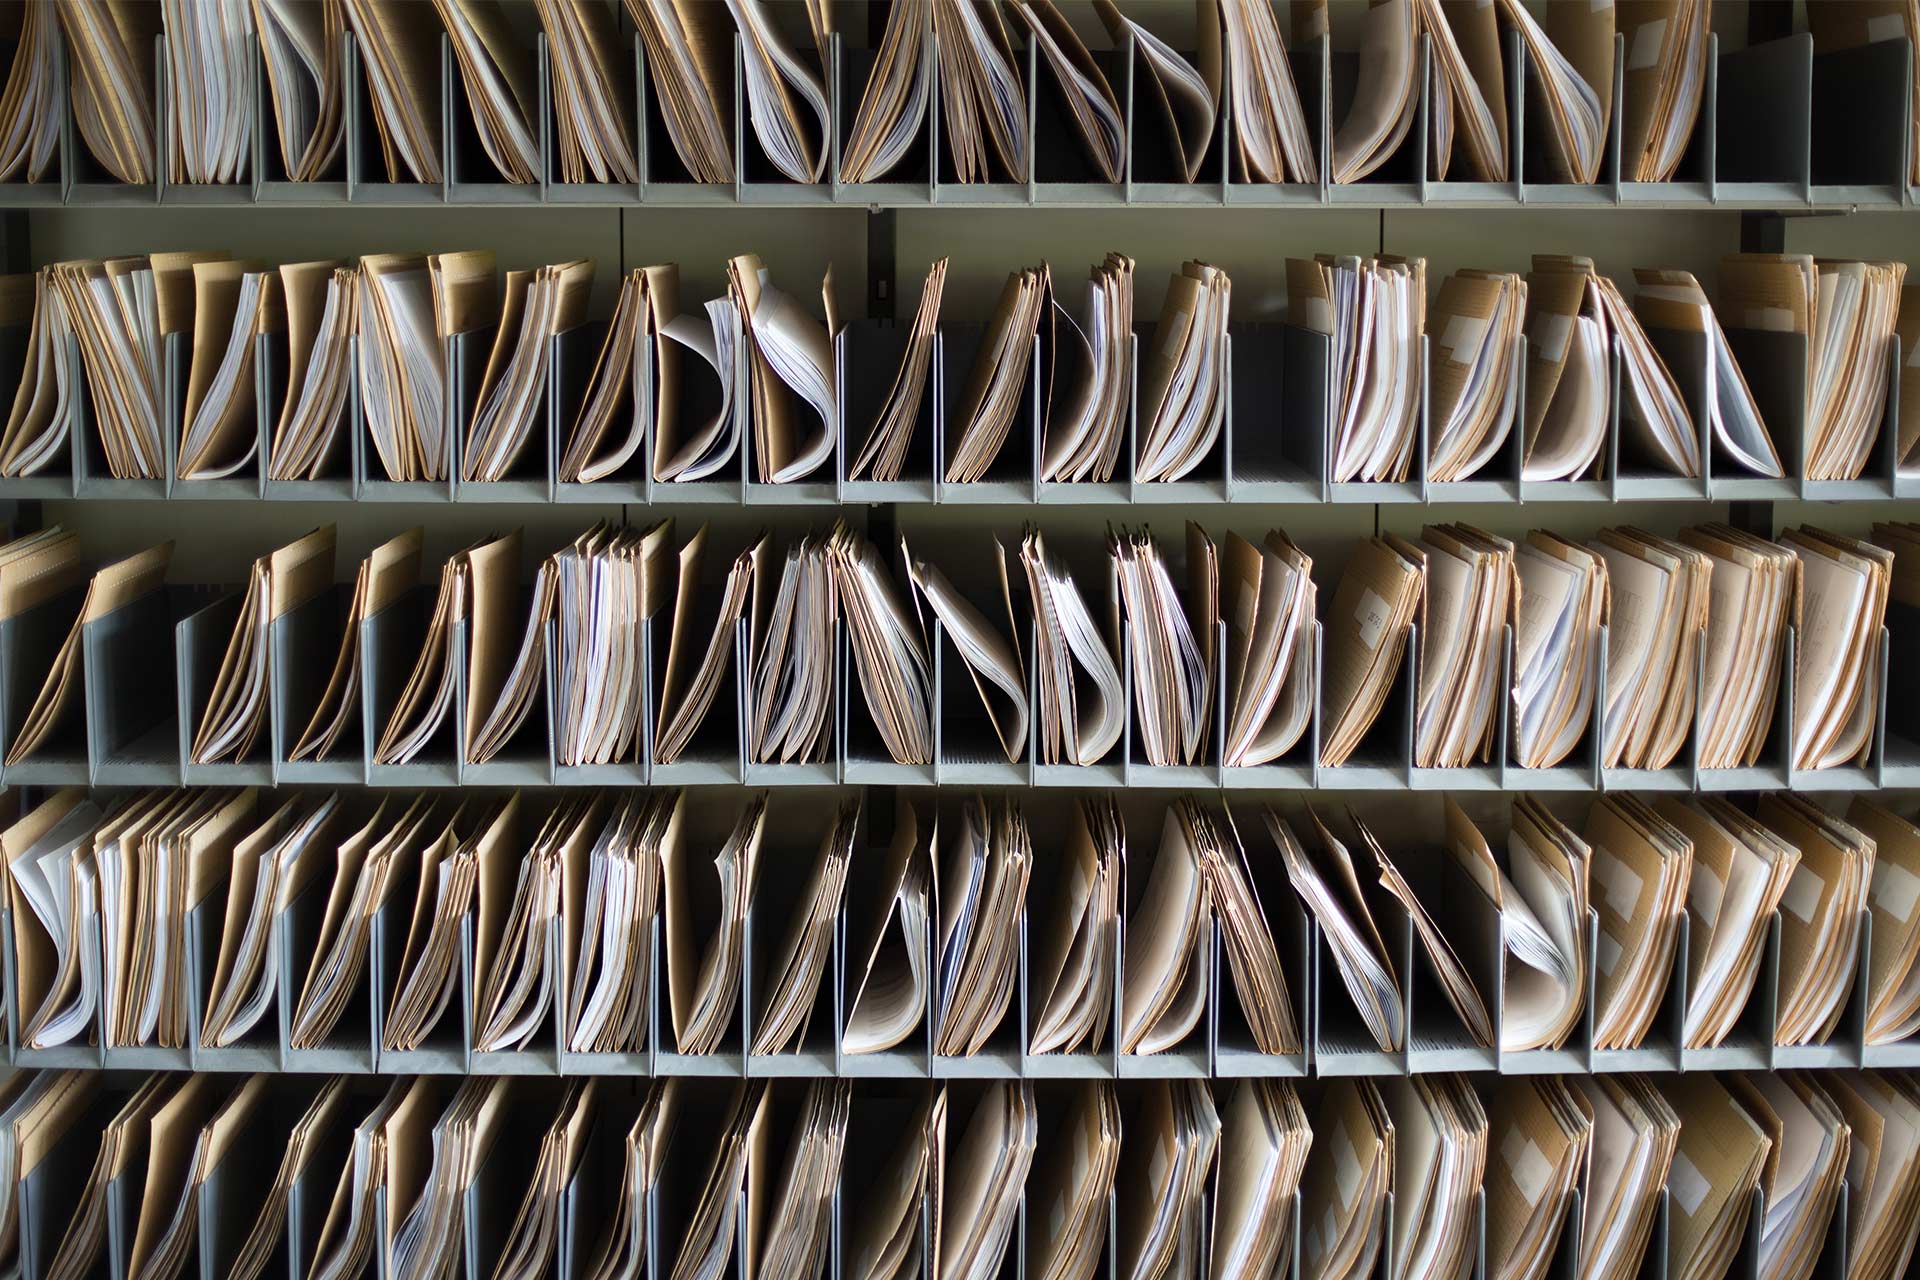 Rows of paper documents in folders organised into compartments.